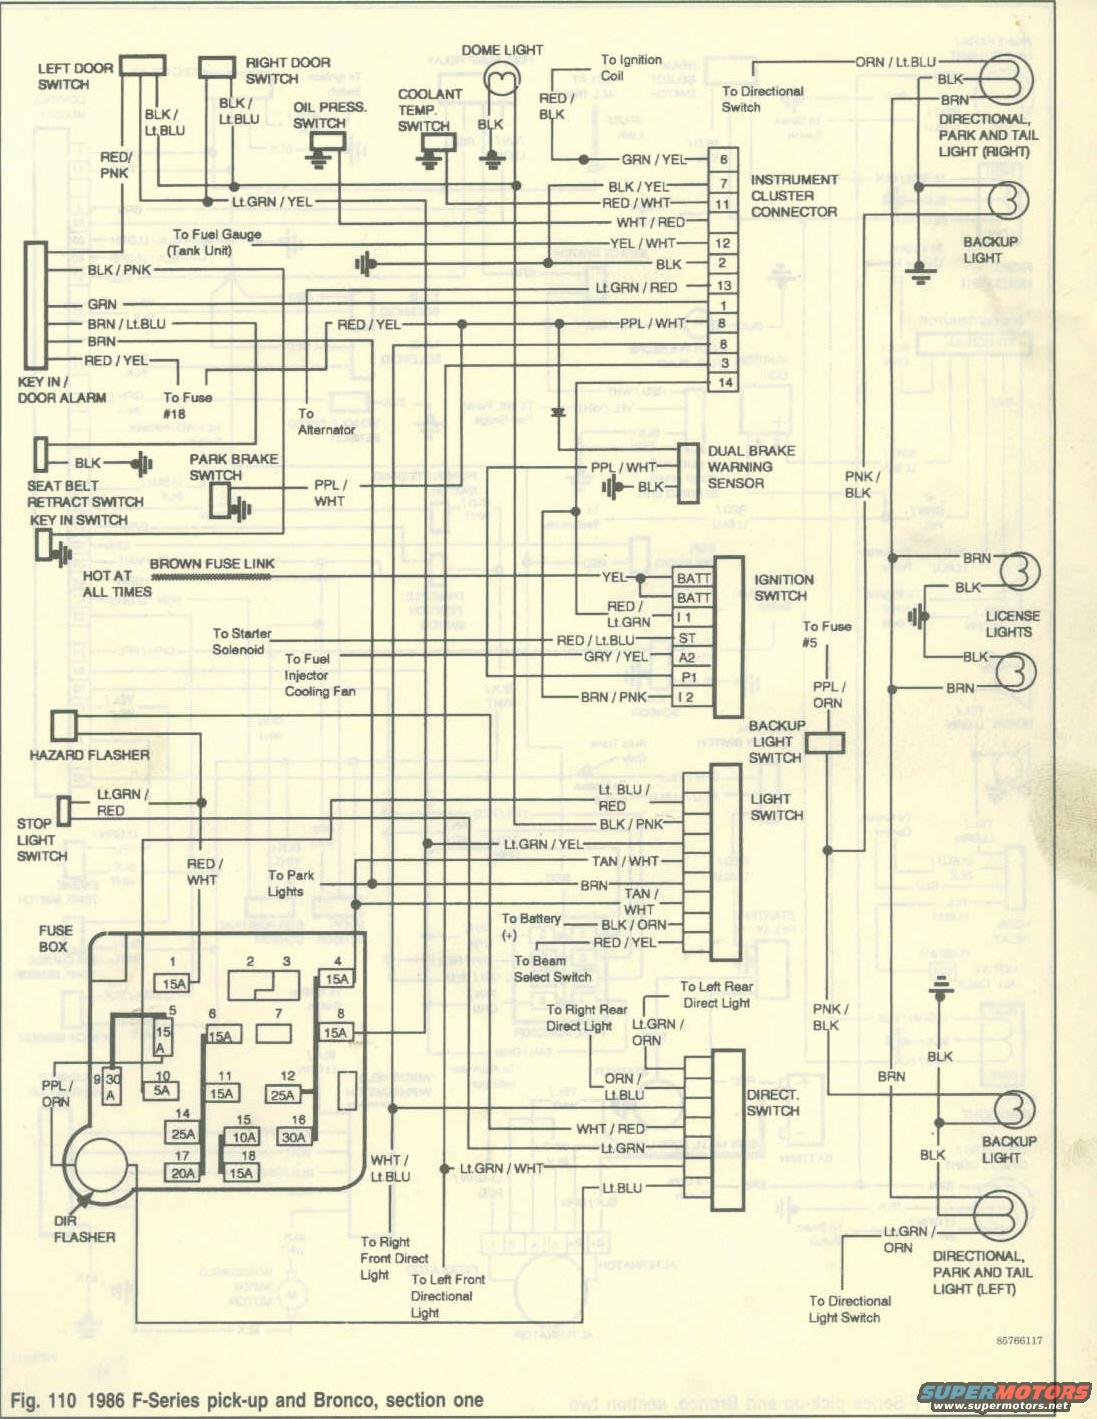 Wiring diagram for 85 ford bronco #9